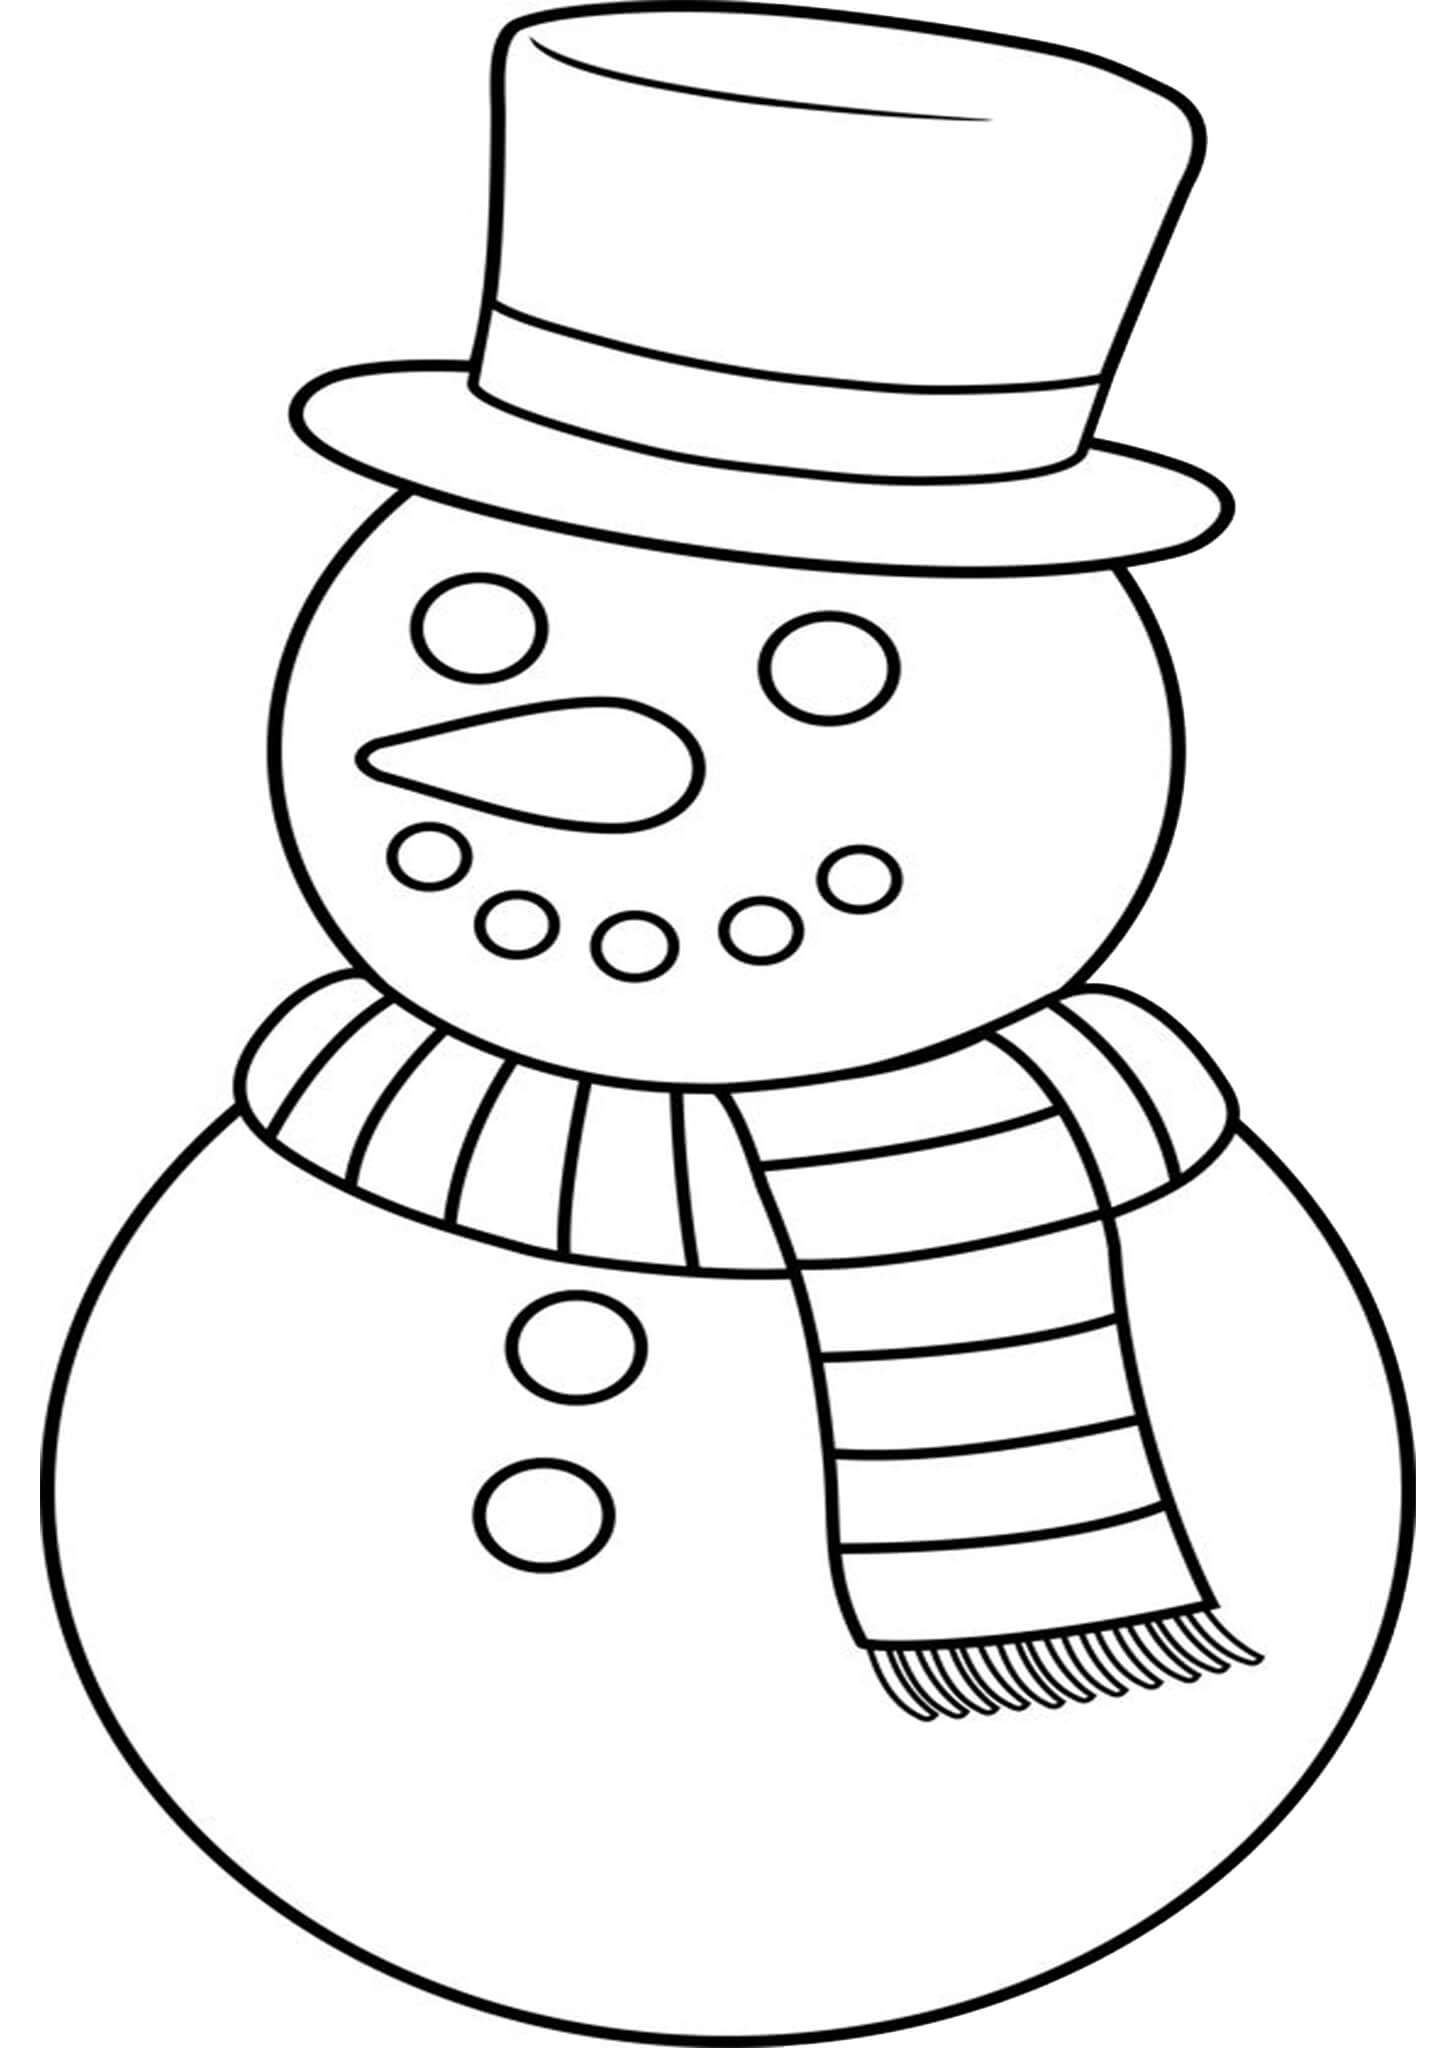 Free Printable Snowman Coloring Pages Snowman Coloring Pages Snowman 